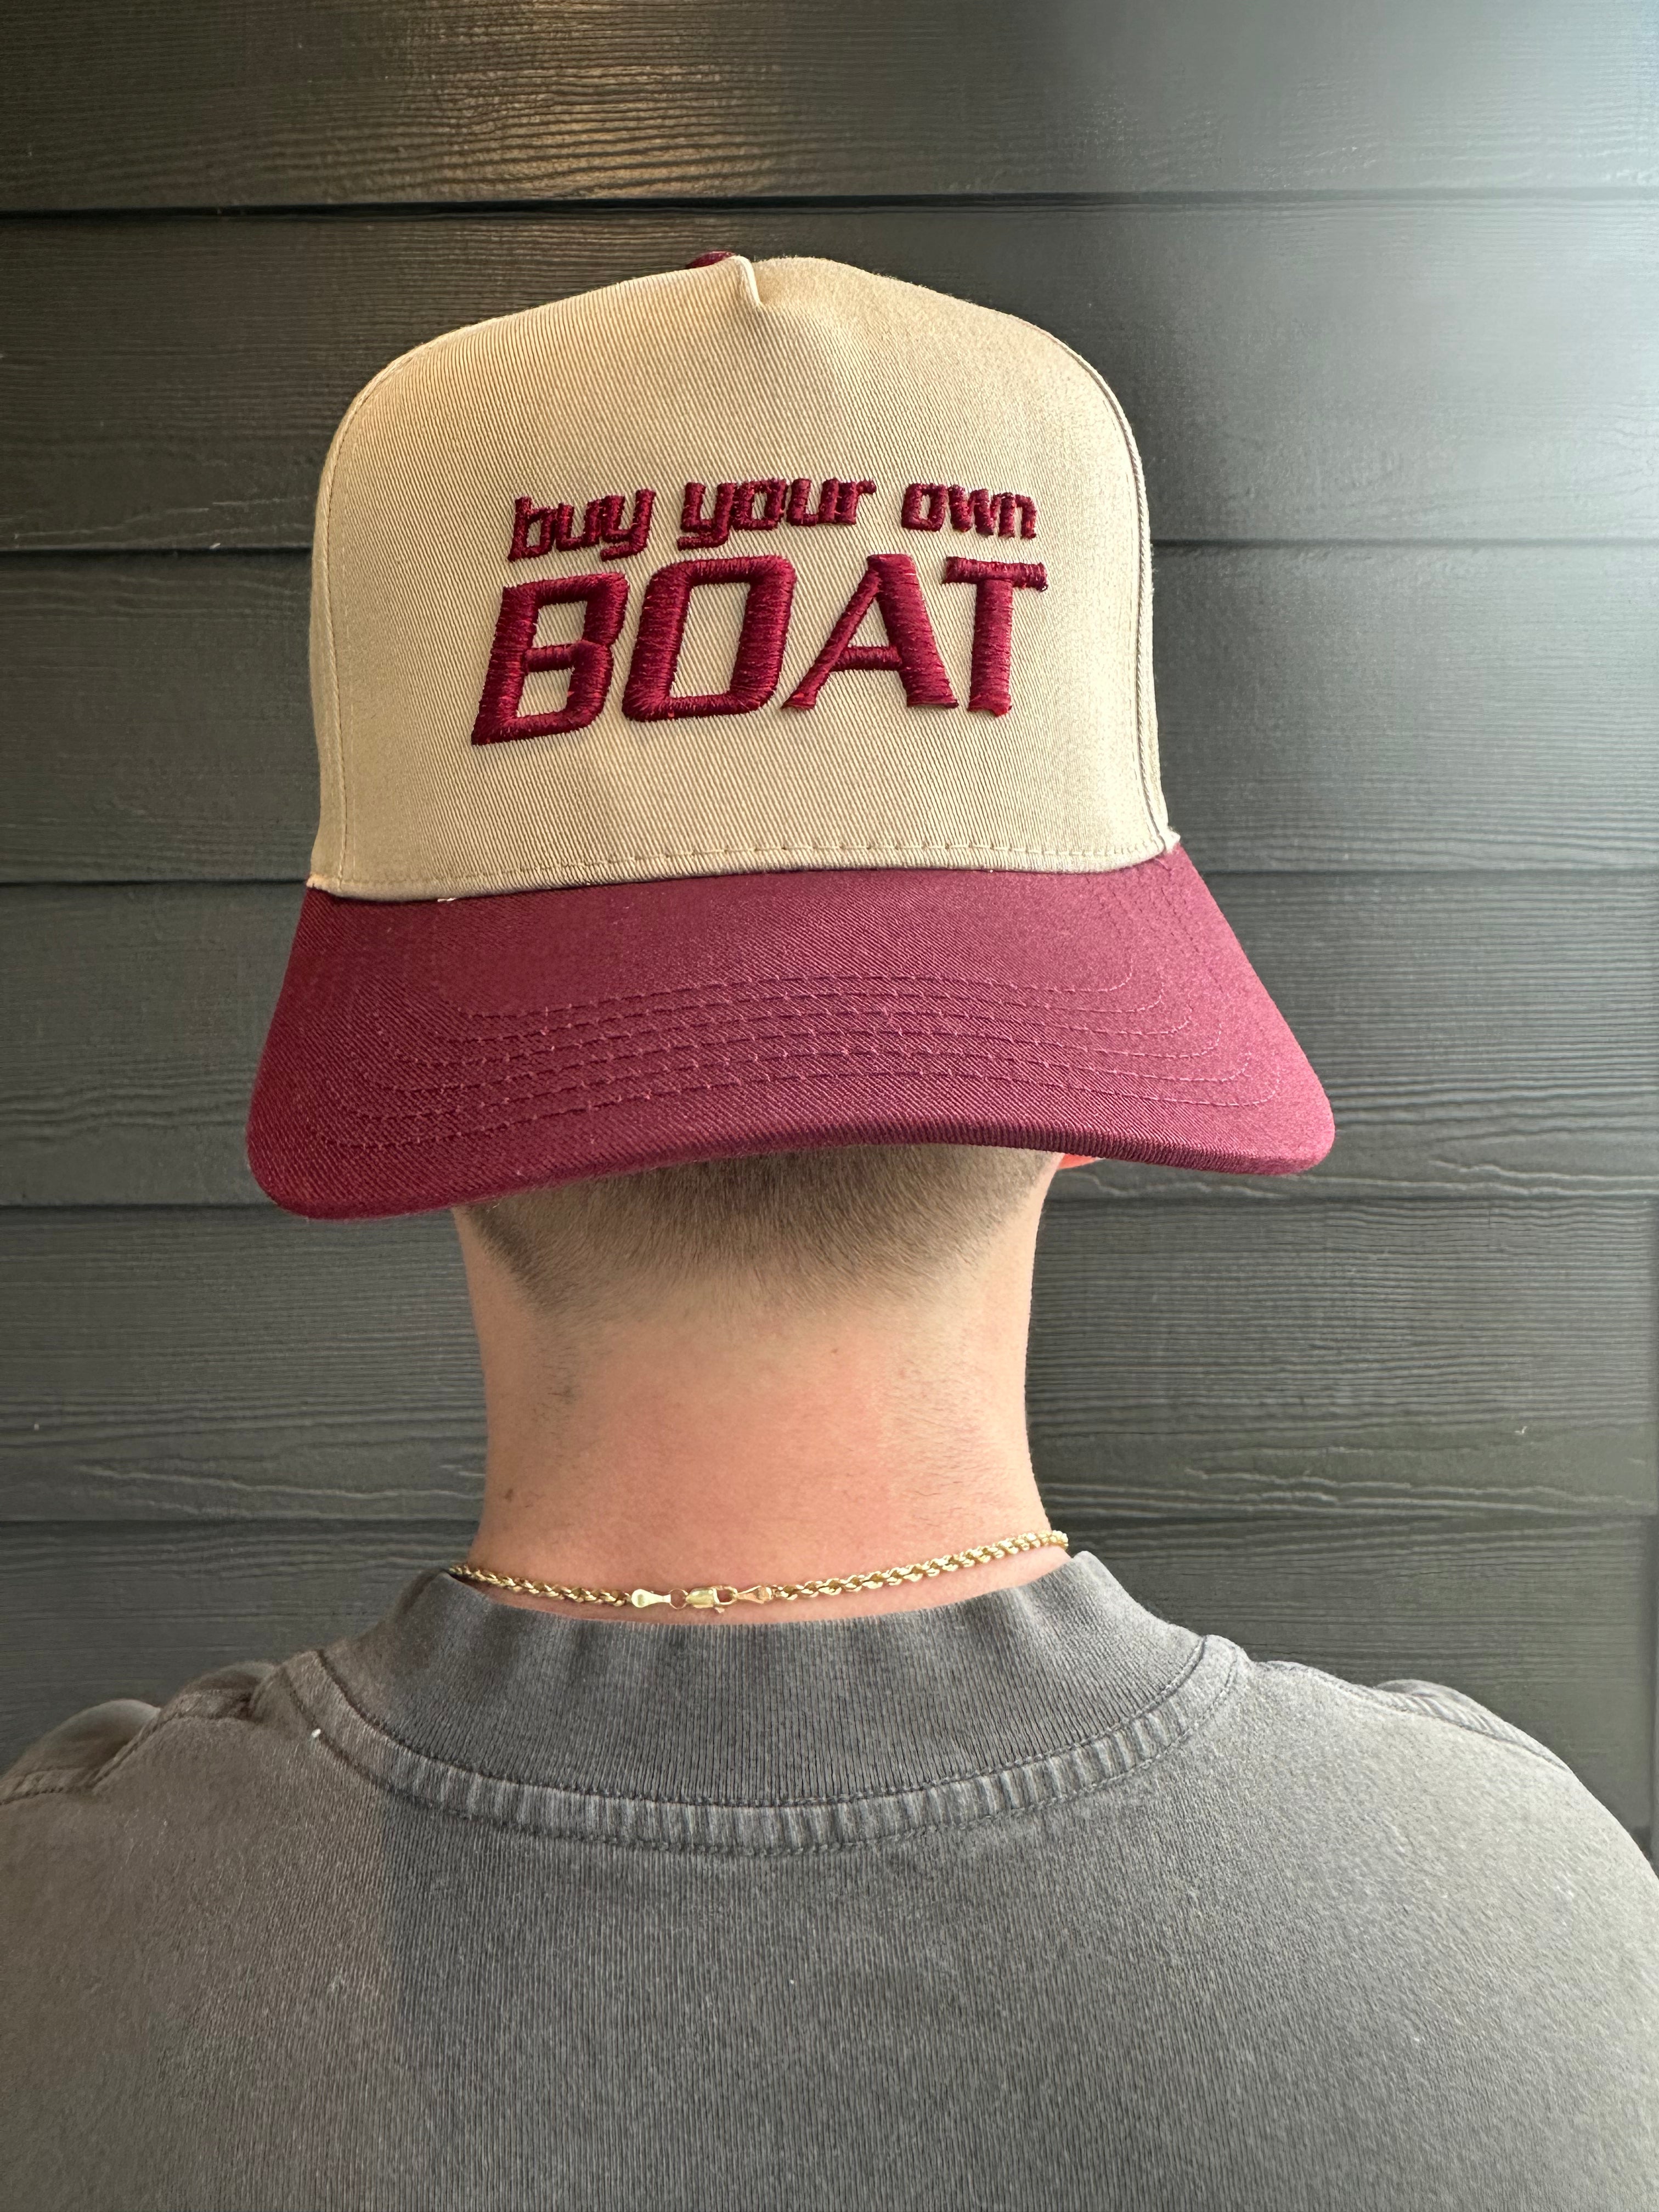 Buy Your Own Boat Hat – Kennedy Eurich